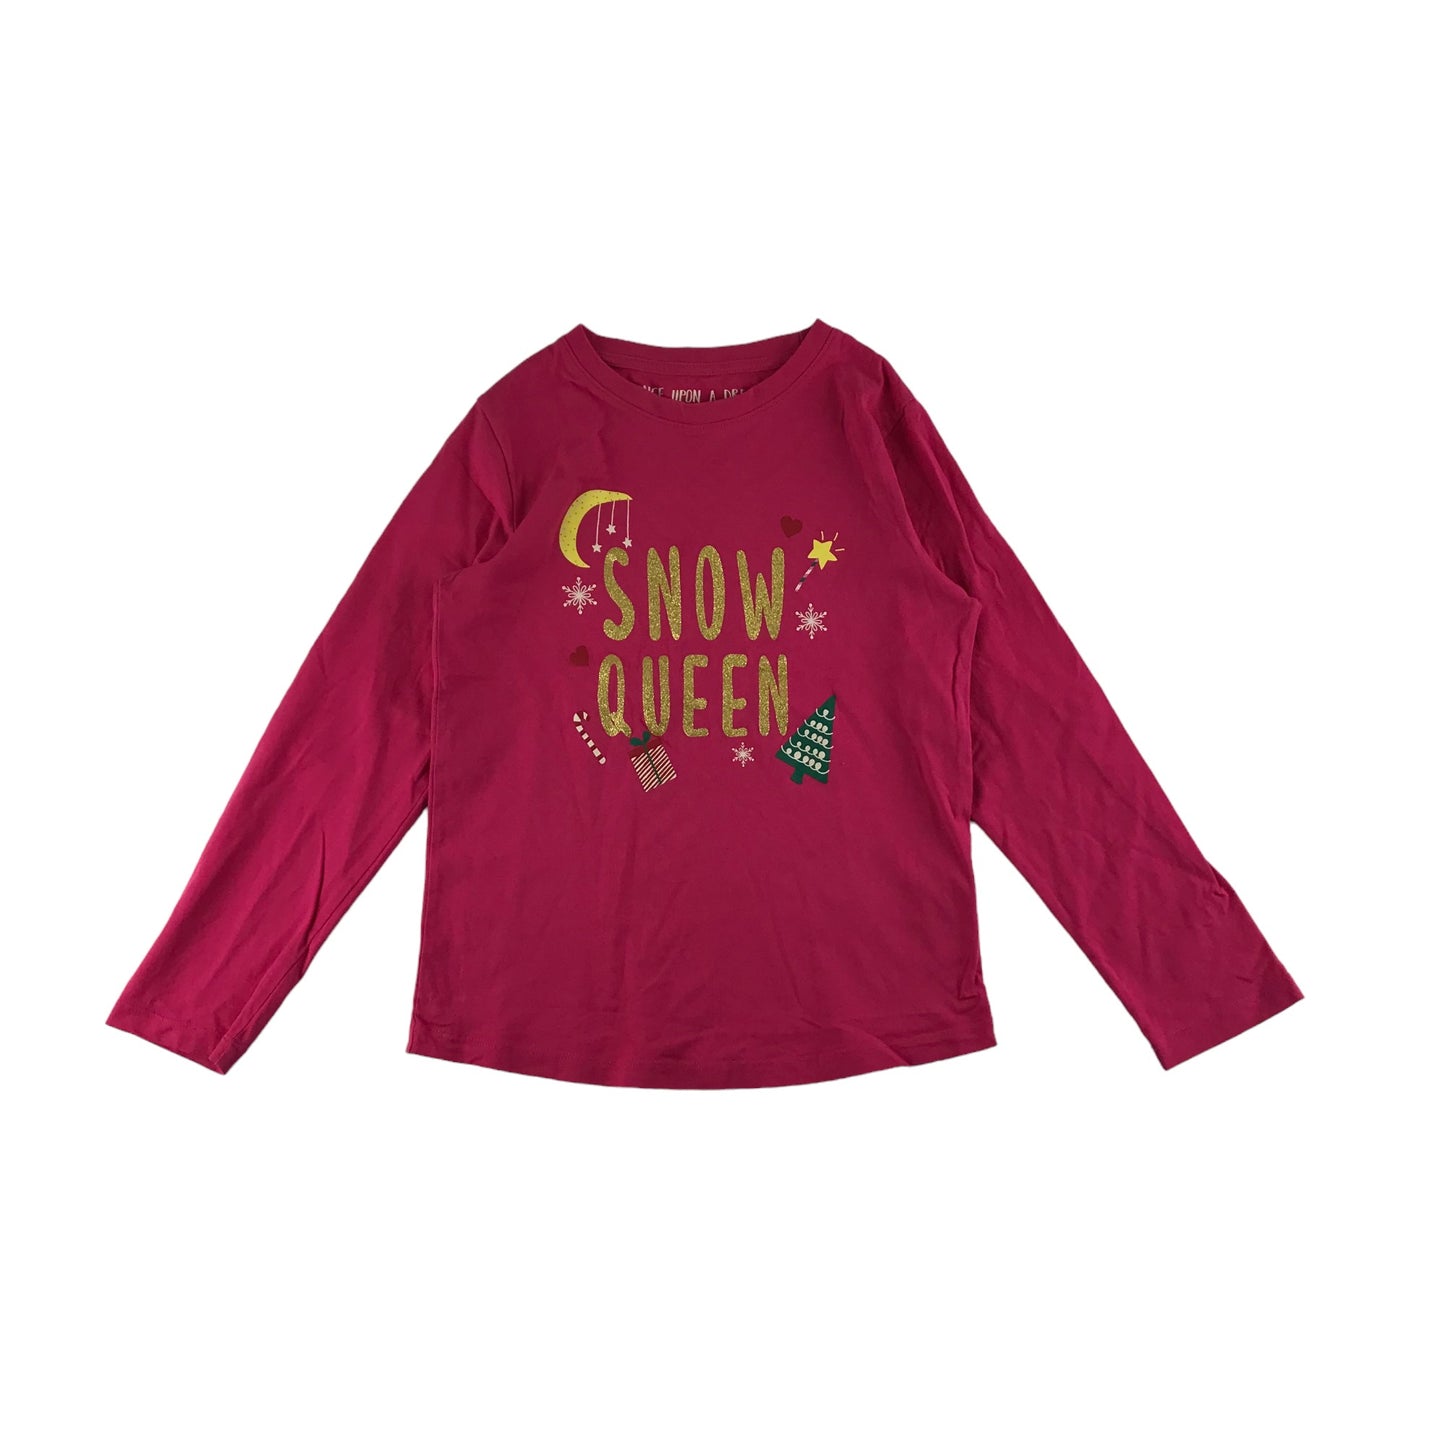 Very Christmas T-Shirt Age 9 Pink Snow Queen Graphic Long Sleeve